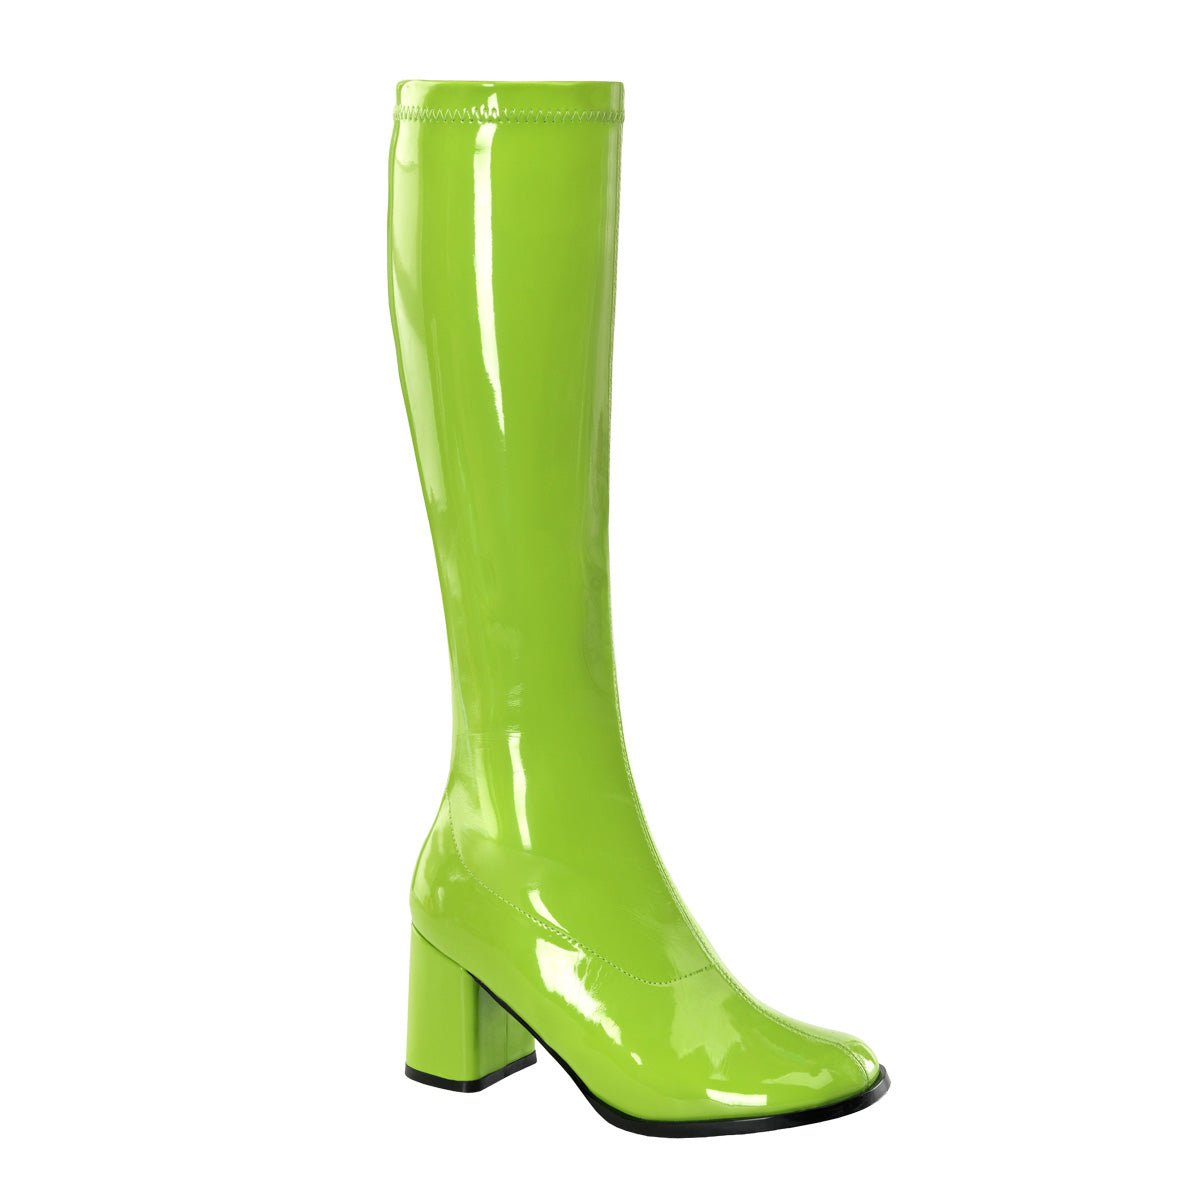 Clearance Funtasma Gogo 300 Lime Green Size 4UK/7USA - From Clearance Sold By Alternative Footwear